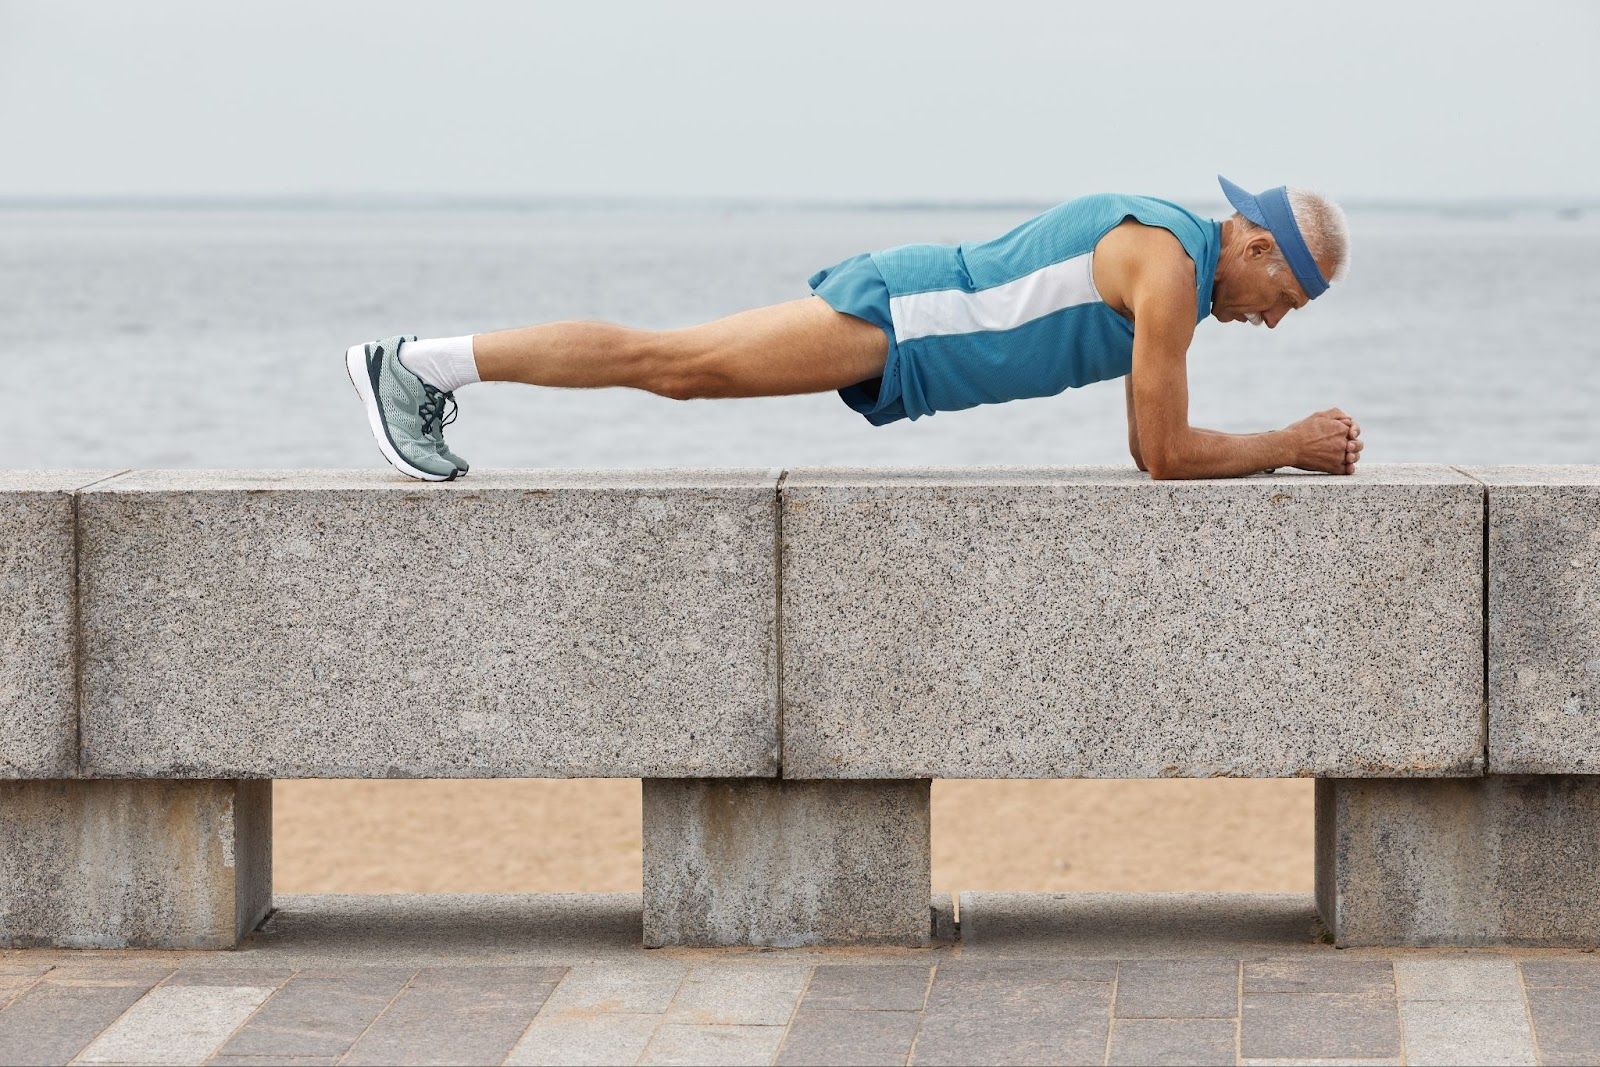 A senior sports enthusiast wearing a blue and white jersey and shorts does a plank exercise on a ledge by the bay.
